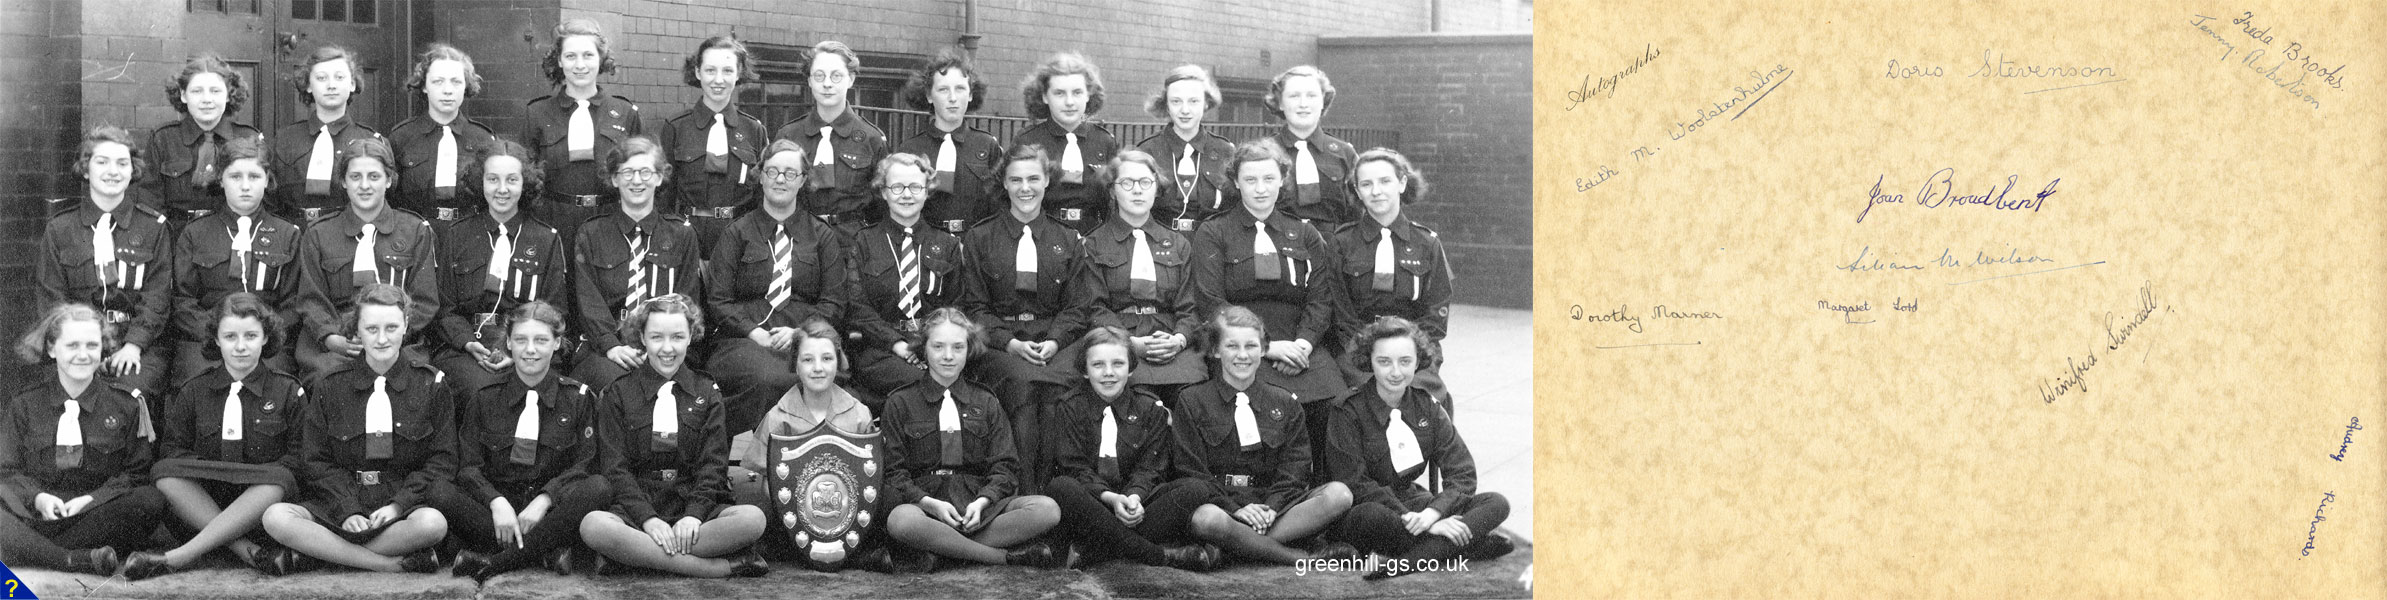 1939 School Guides Group